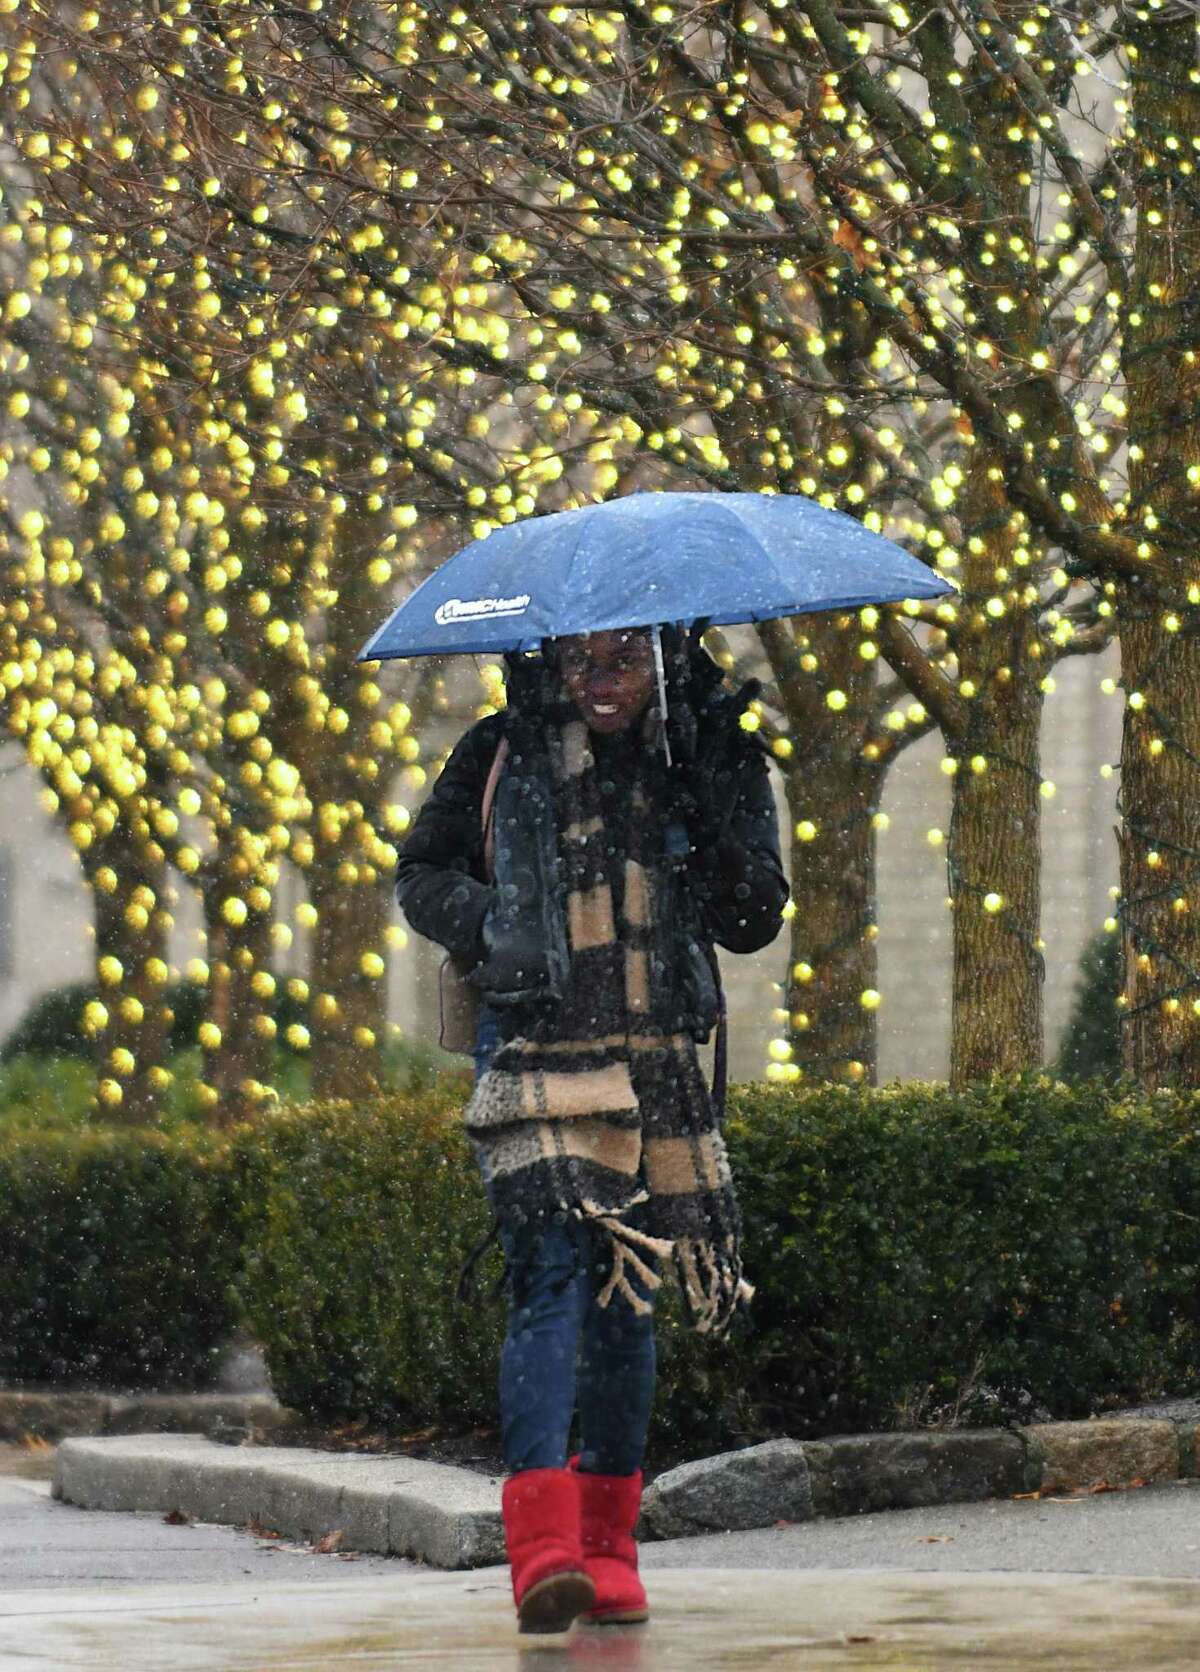 Stamford's Thamara Desronvil uses an umbrella to take cover from the snow in Greenwich, Conn. Thursday, Jan. 20, 2022. The area was hit with rain overnight that turned to light snow as temperatures dropped Thursday morning.